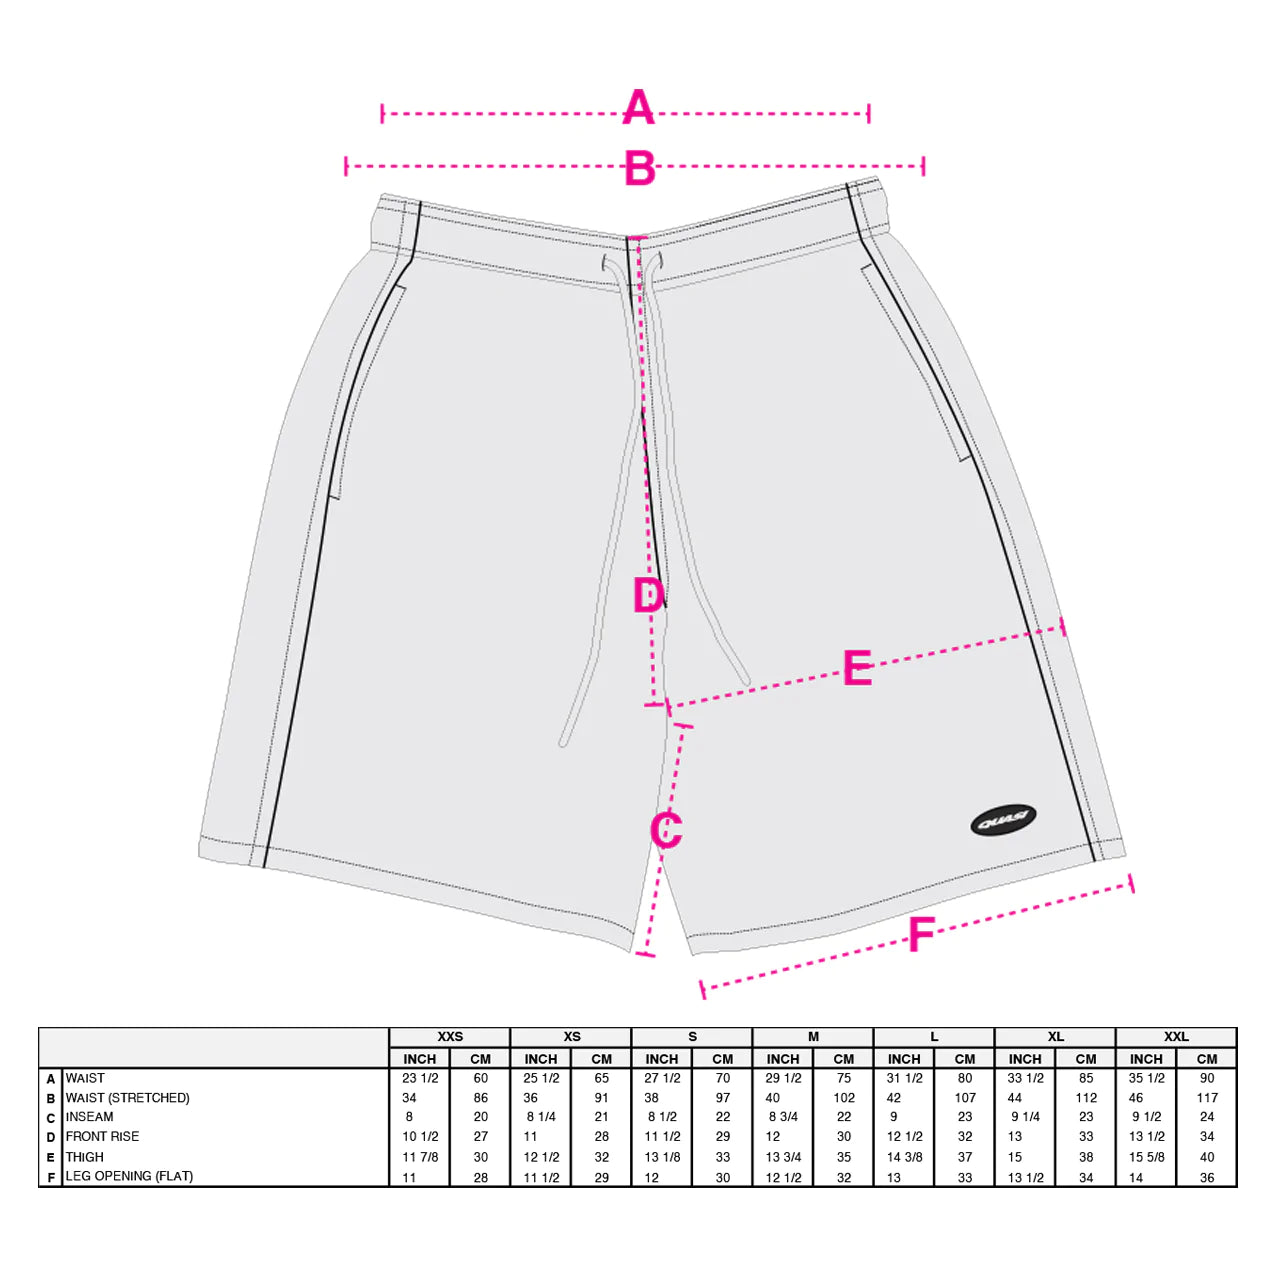 Match Shorts Ylw(size options listed)